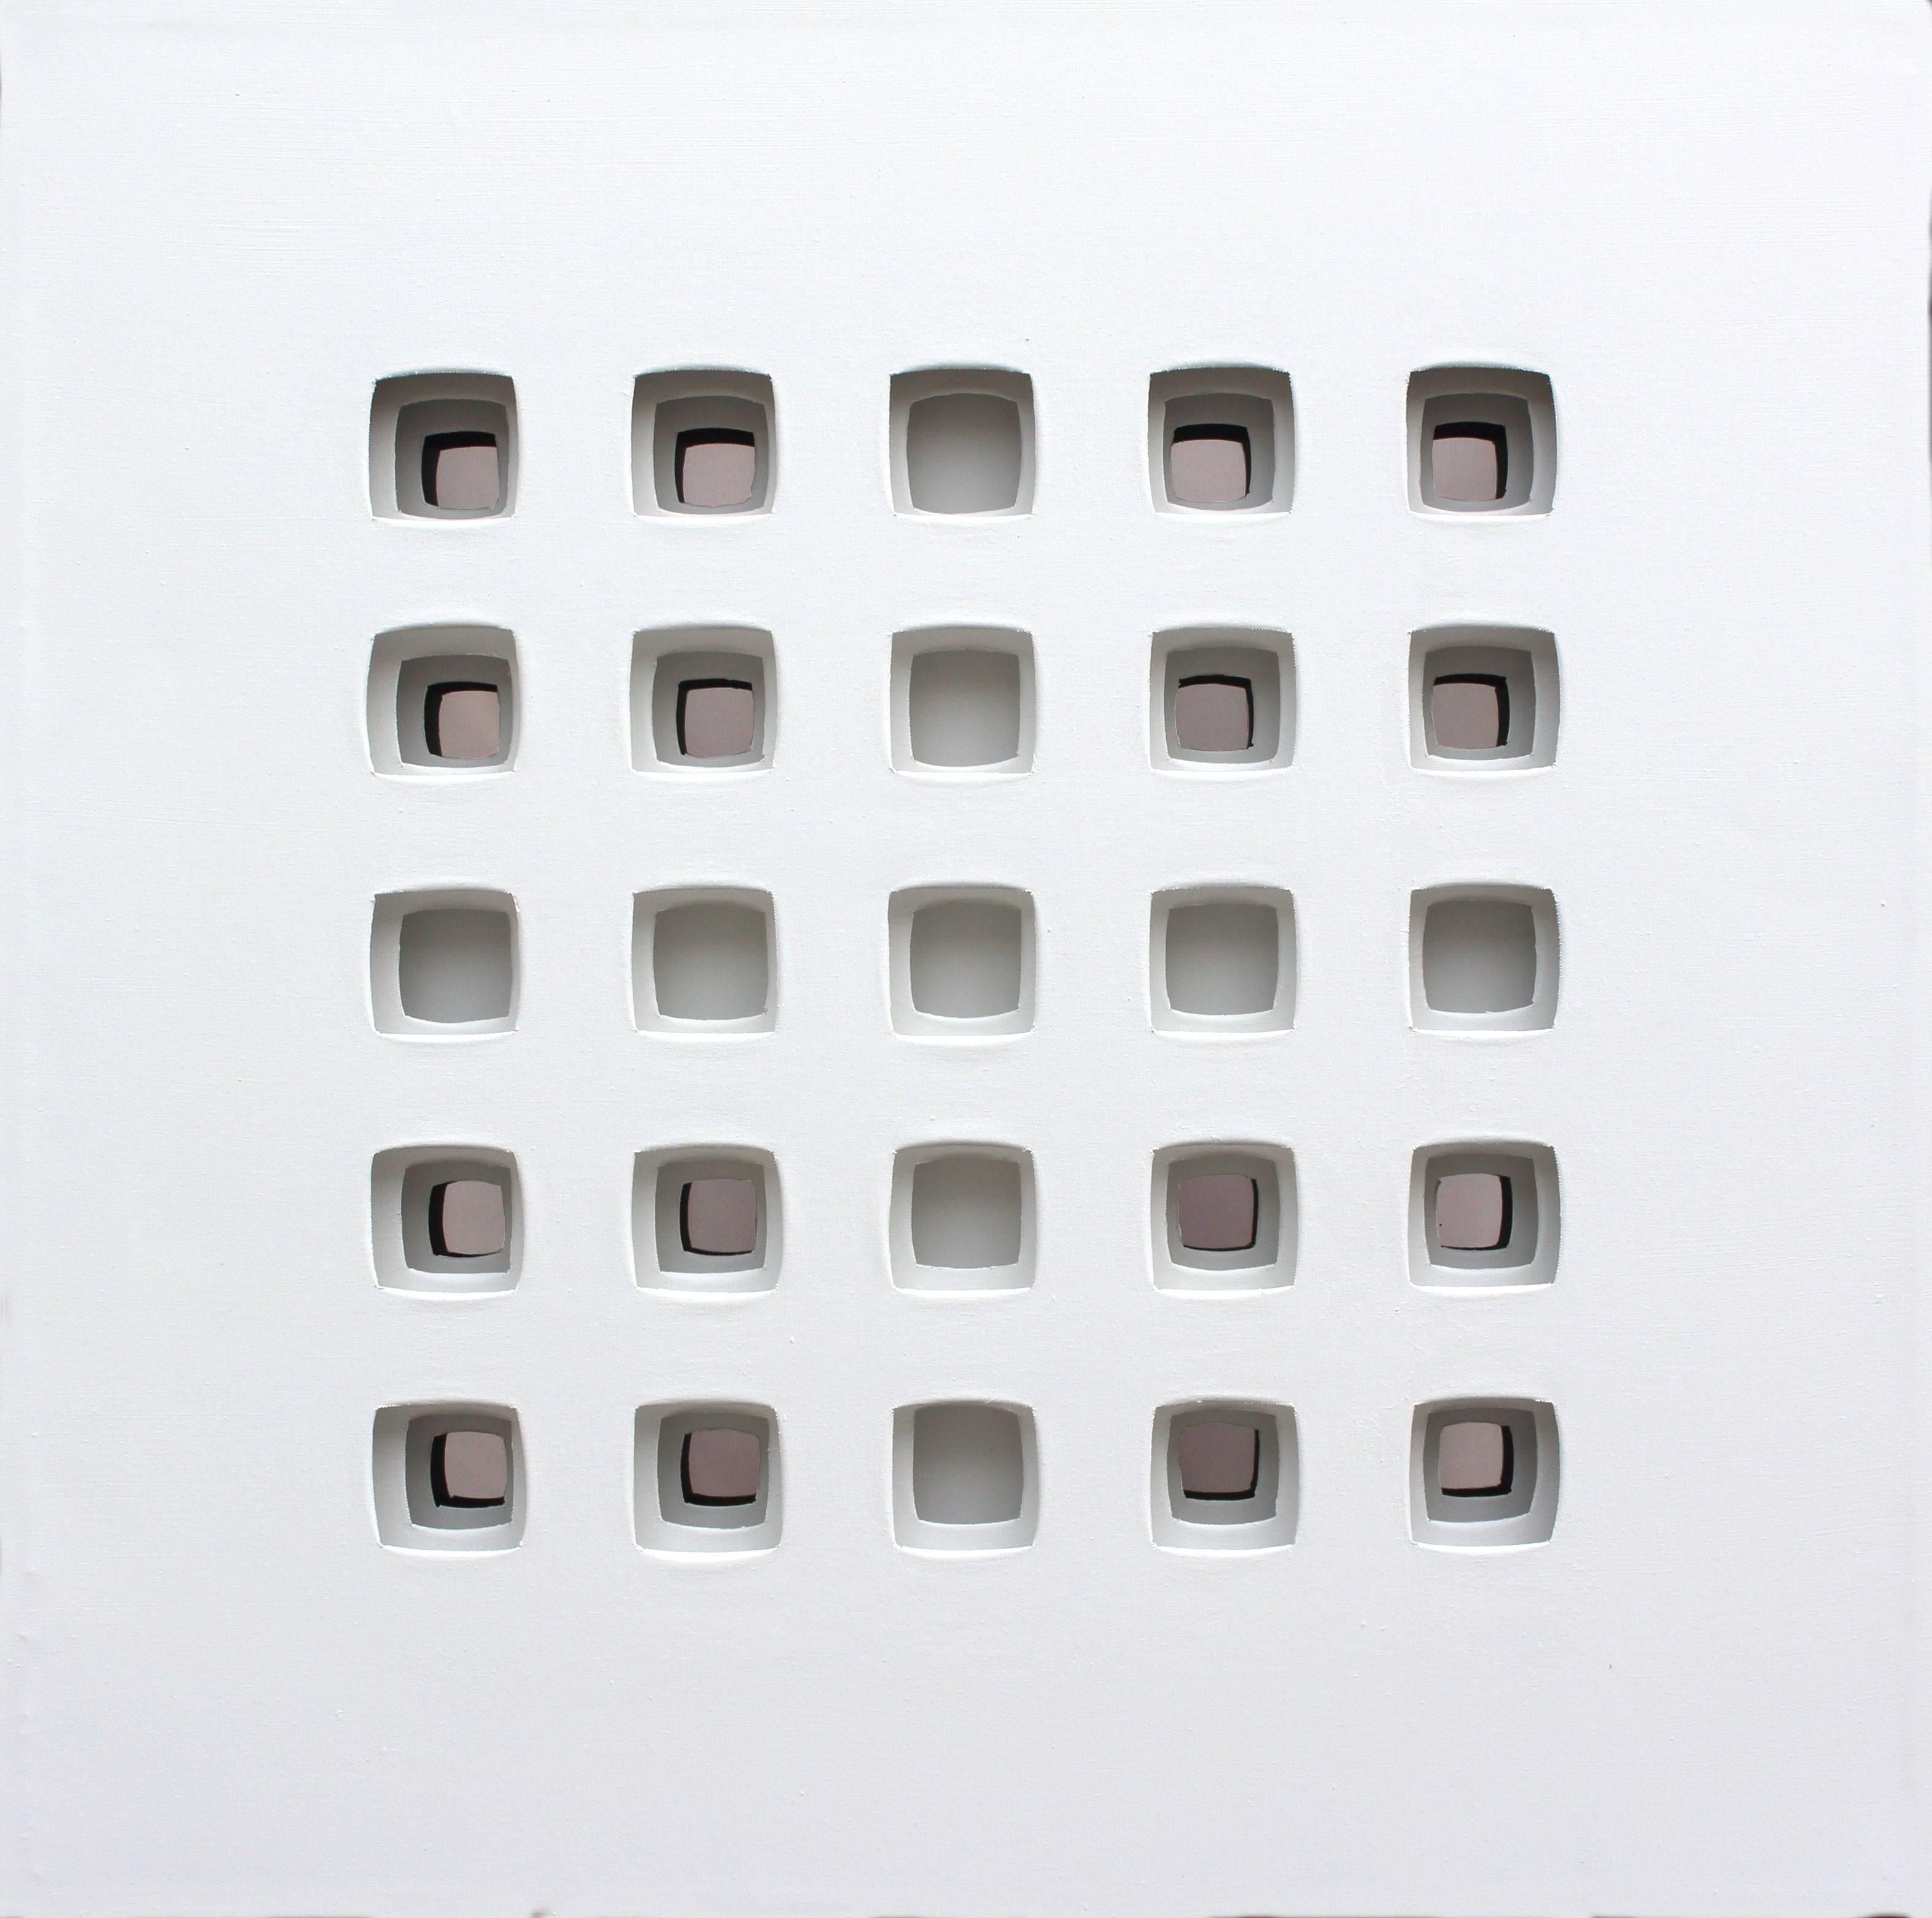 Vanna Nicolotti – Mandala Bianco

Carved and painted canvas and anodized metal, 2004

Dimensions: 60 x 60 cm